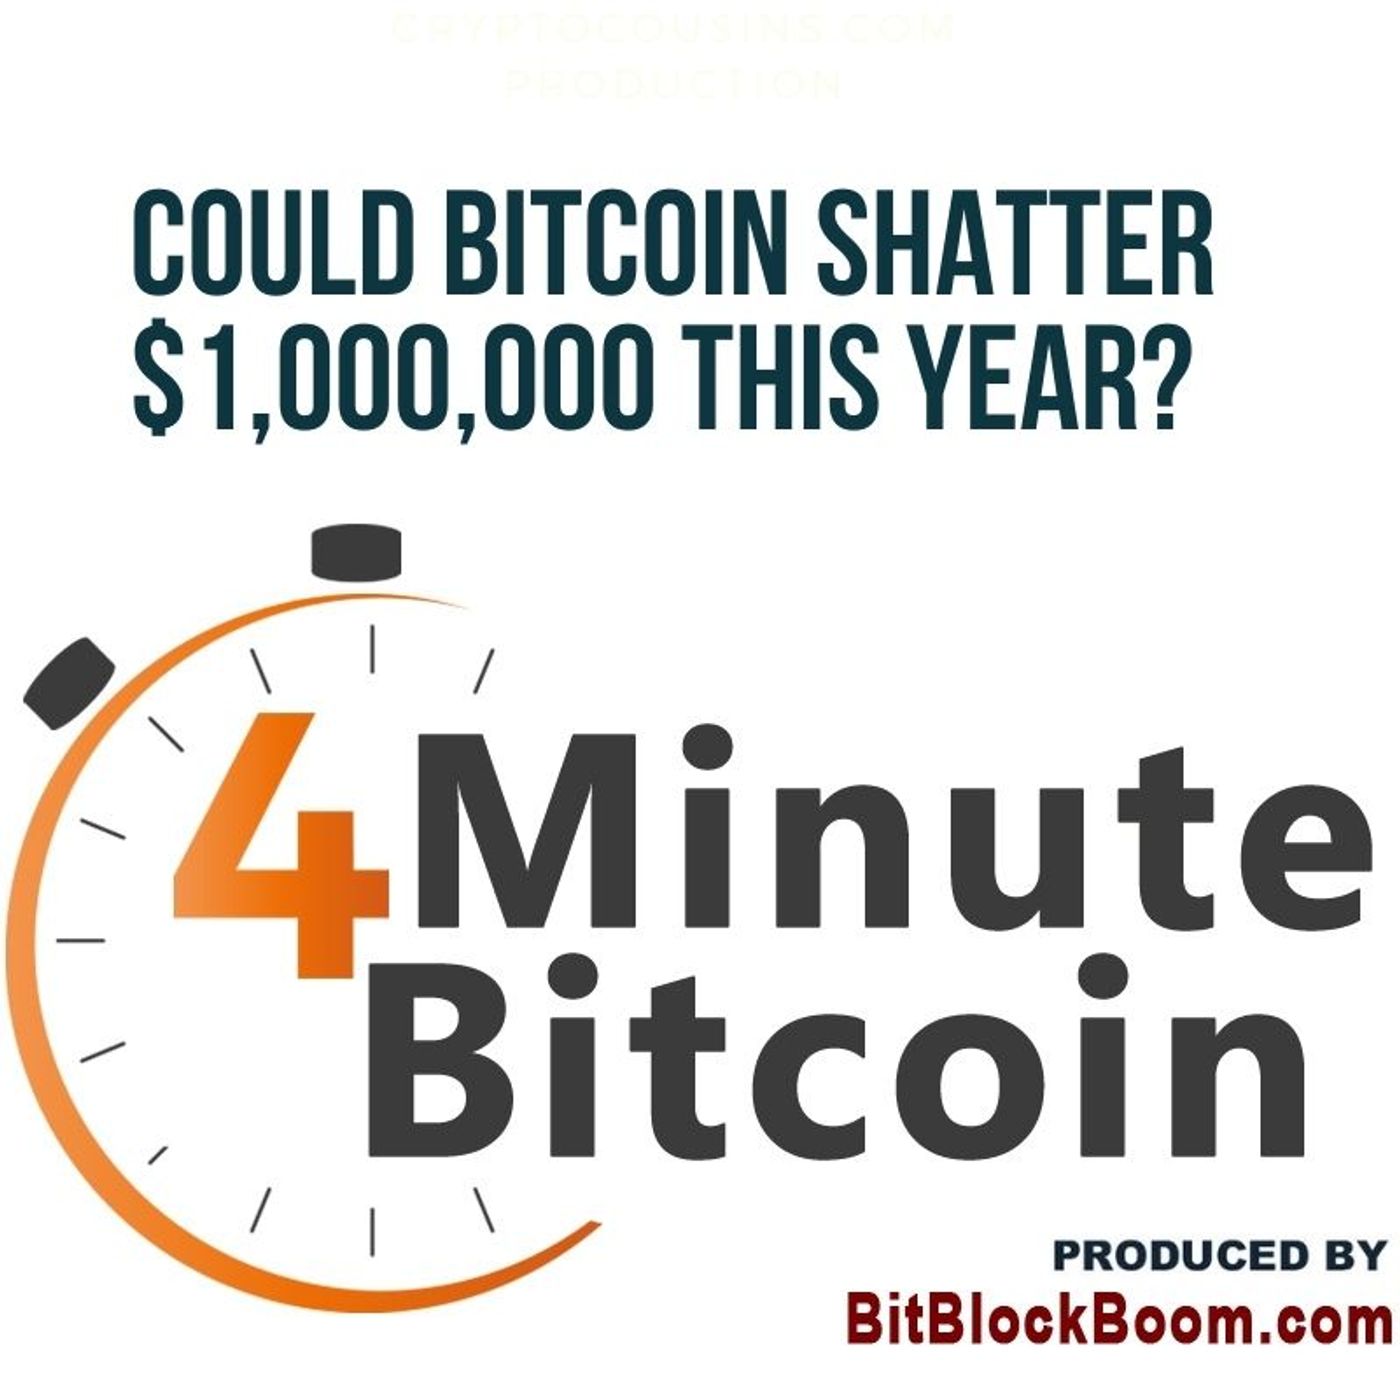 Could Bitcoin Shatter $1,000,000 This Year?